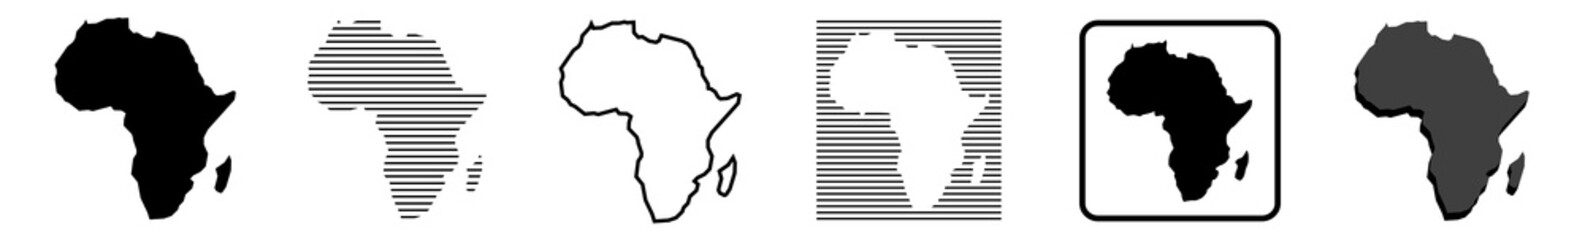 Africa Map | African Border | Continent | Variations